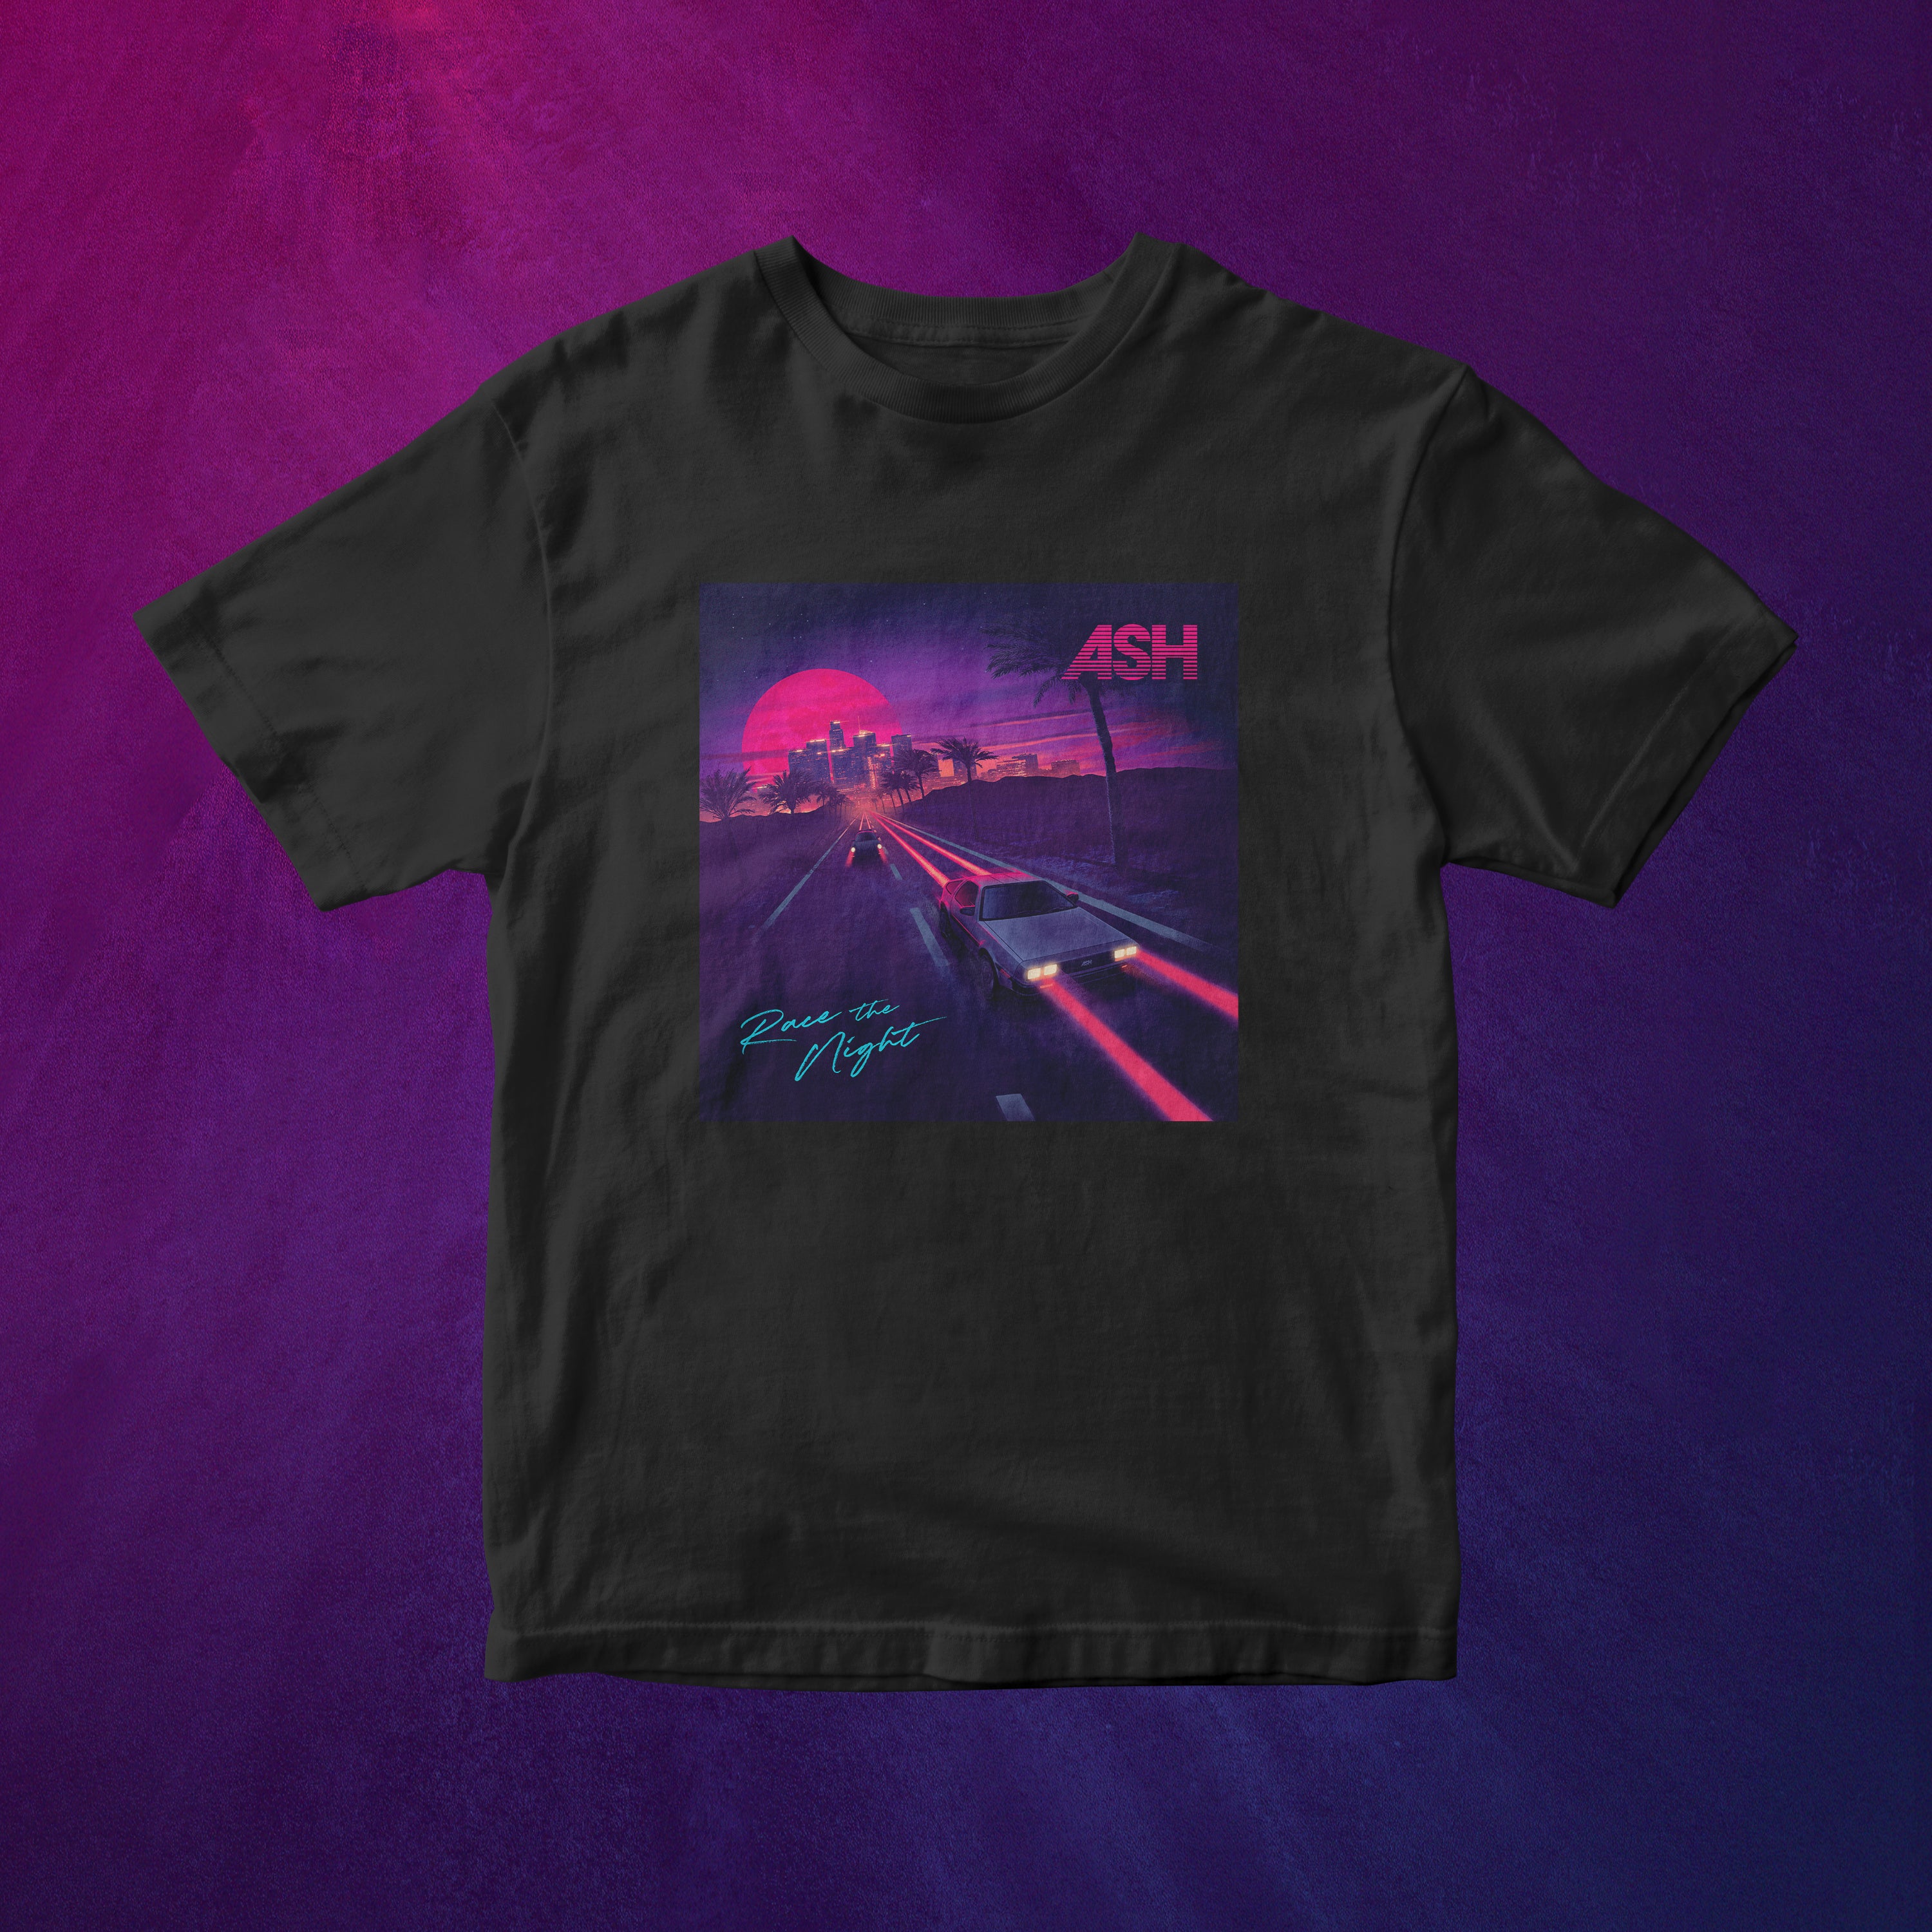 RACE THE NIGHT | ASH Official Store – Ash Official Store